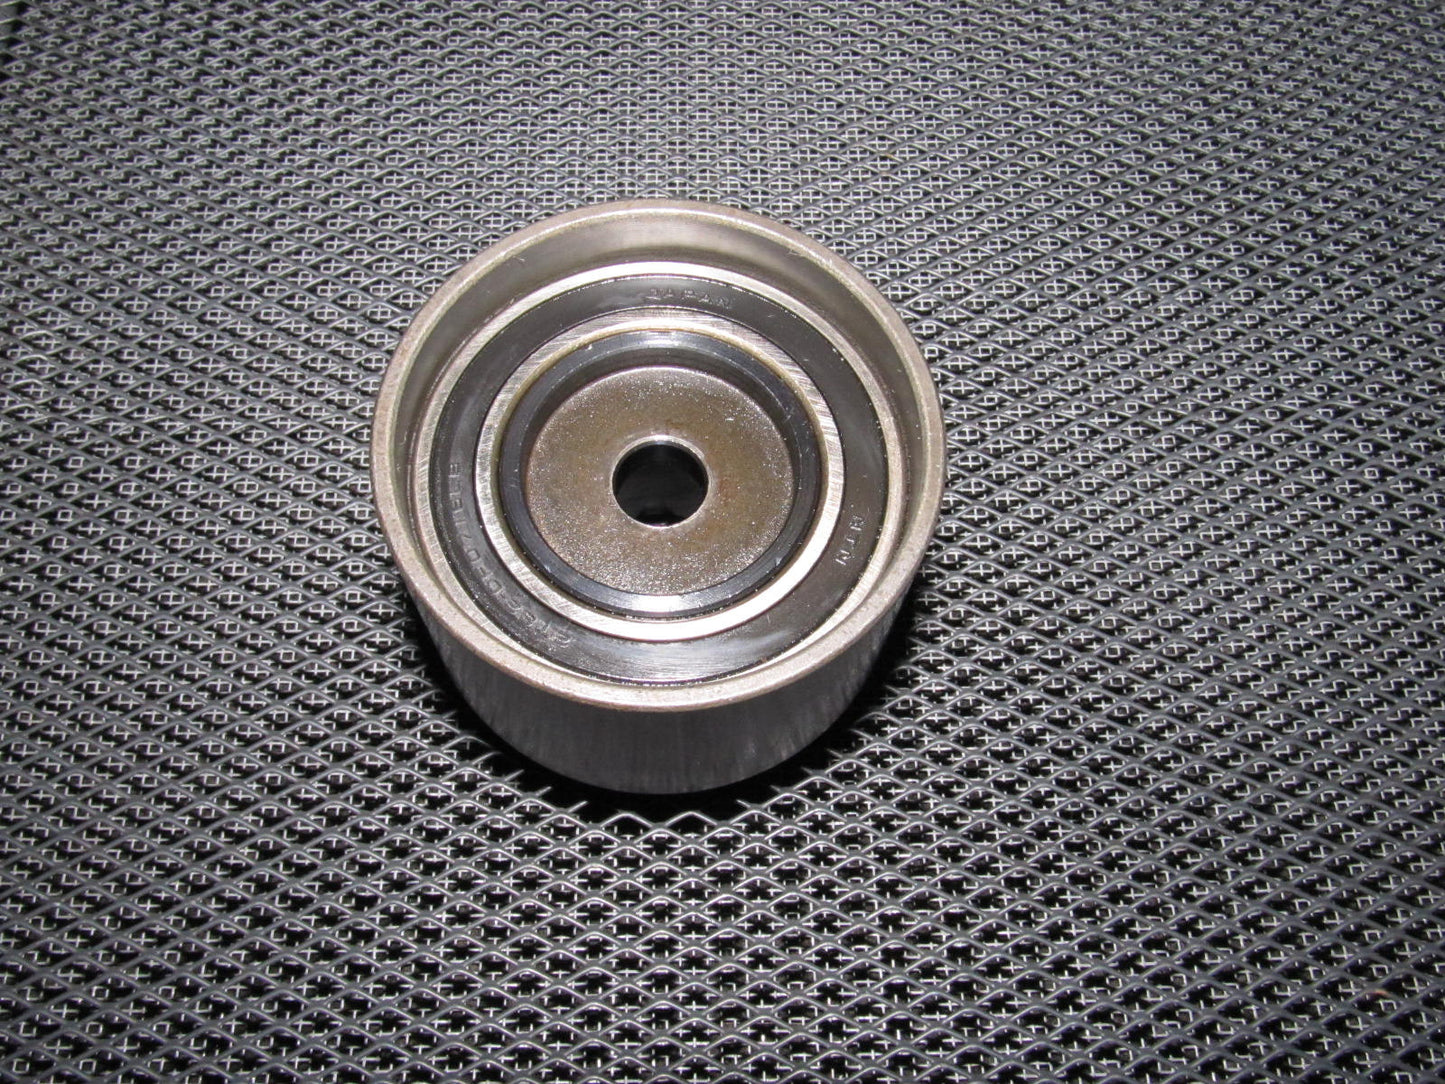 90 91 92 93 94 95 96 Nissan 300zx Engine Timing Belt Tension Pulley